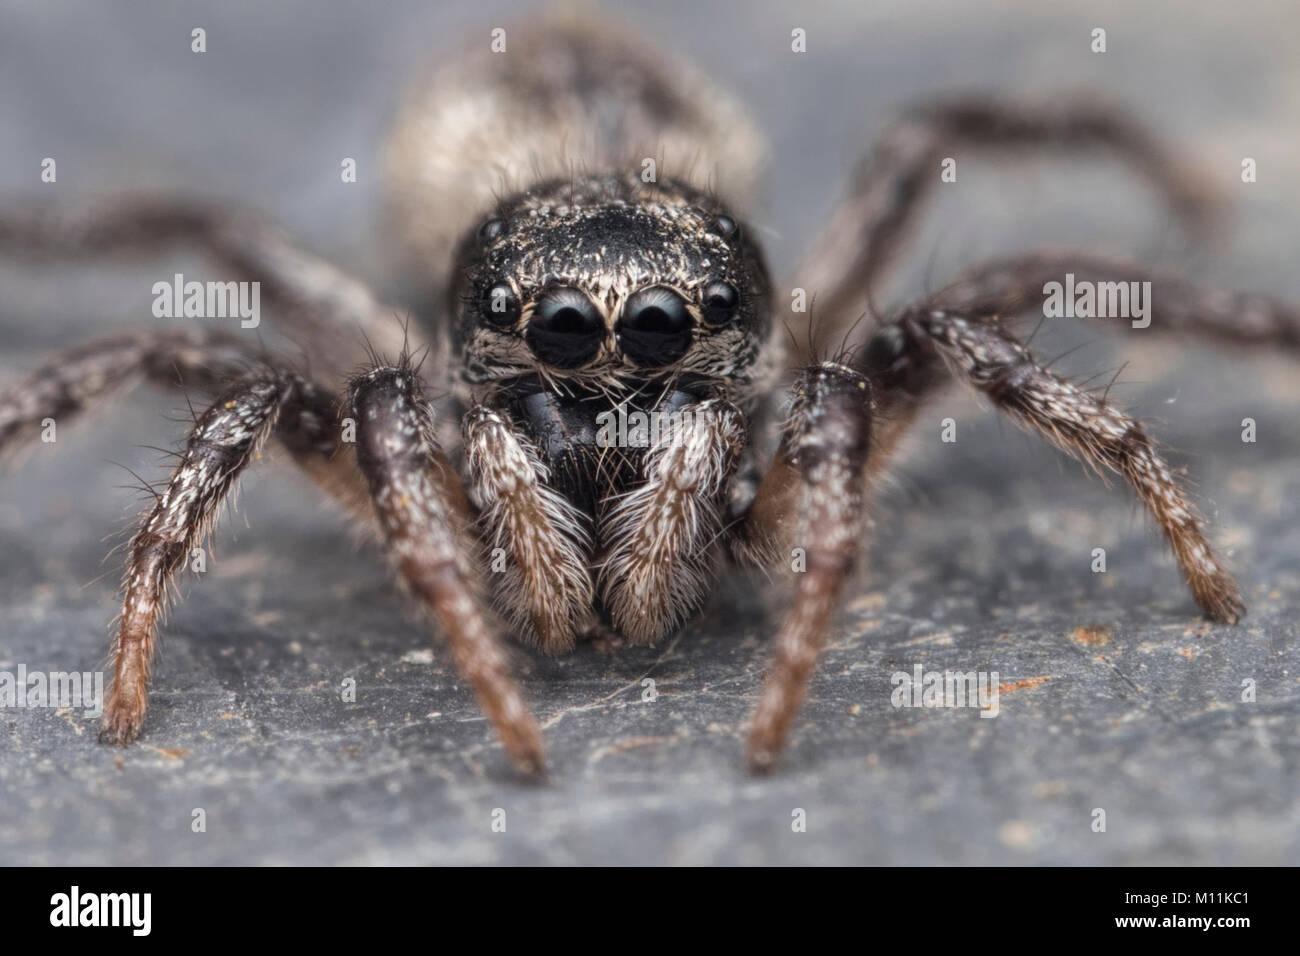 Zebra Thomisidae (Salticus scenicus) Photo montrant le frontal de grands yeux. Thurles, Tipperary, Ireland. Banque D'Images